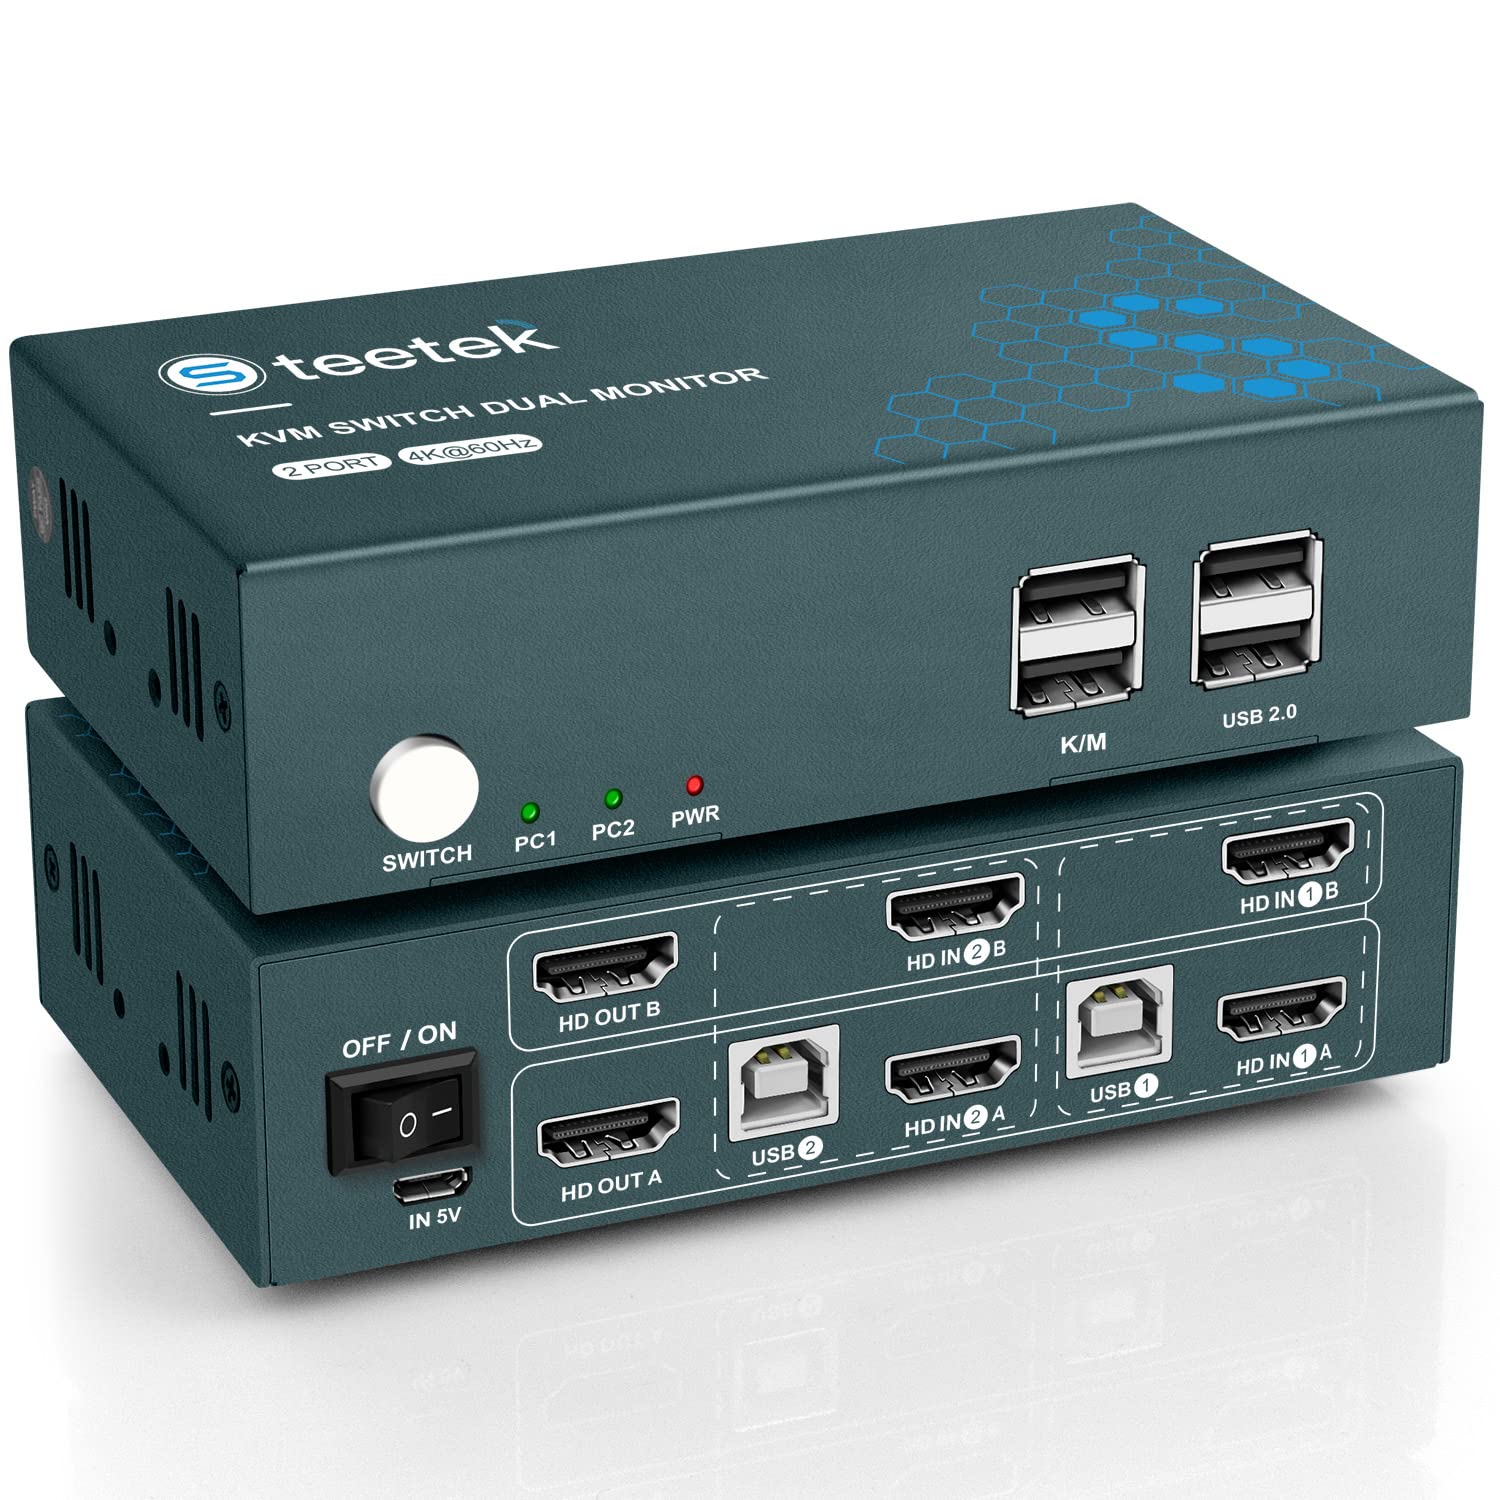 Steetek Dual Monitor KVM Switch HDMI 2 Port, KVM Switch 2 Monitors 2 Computers 4K@60Hz (YUV4:4:4), HDMI KVM Switch 2 in 2 Out, Button Switch and Hotkey Switch, with 4 HDMI and 2 USB Cable